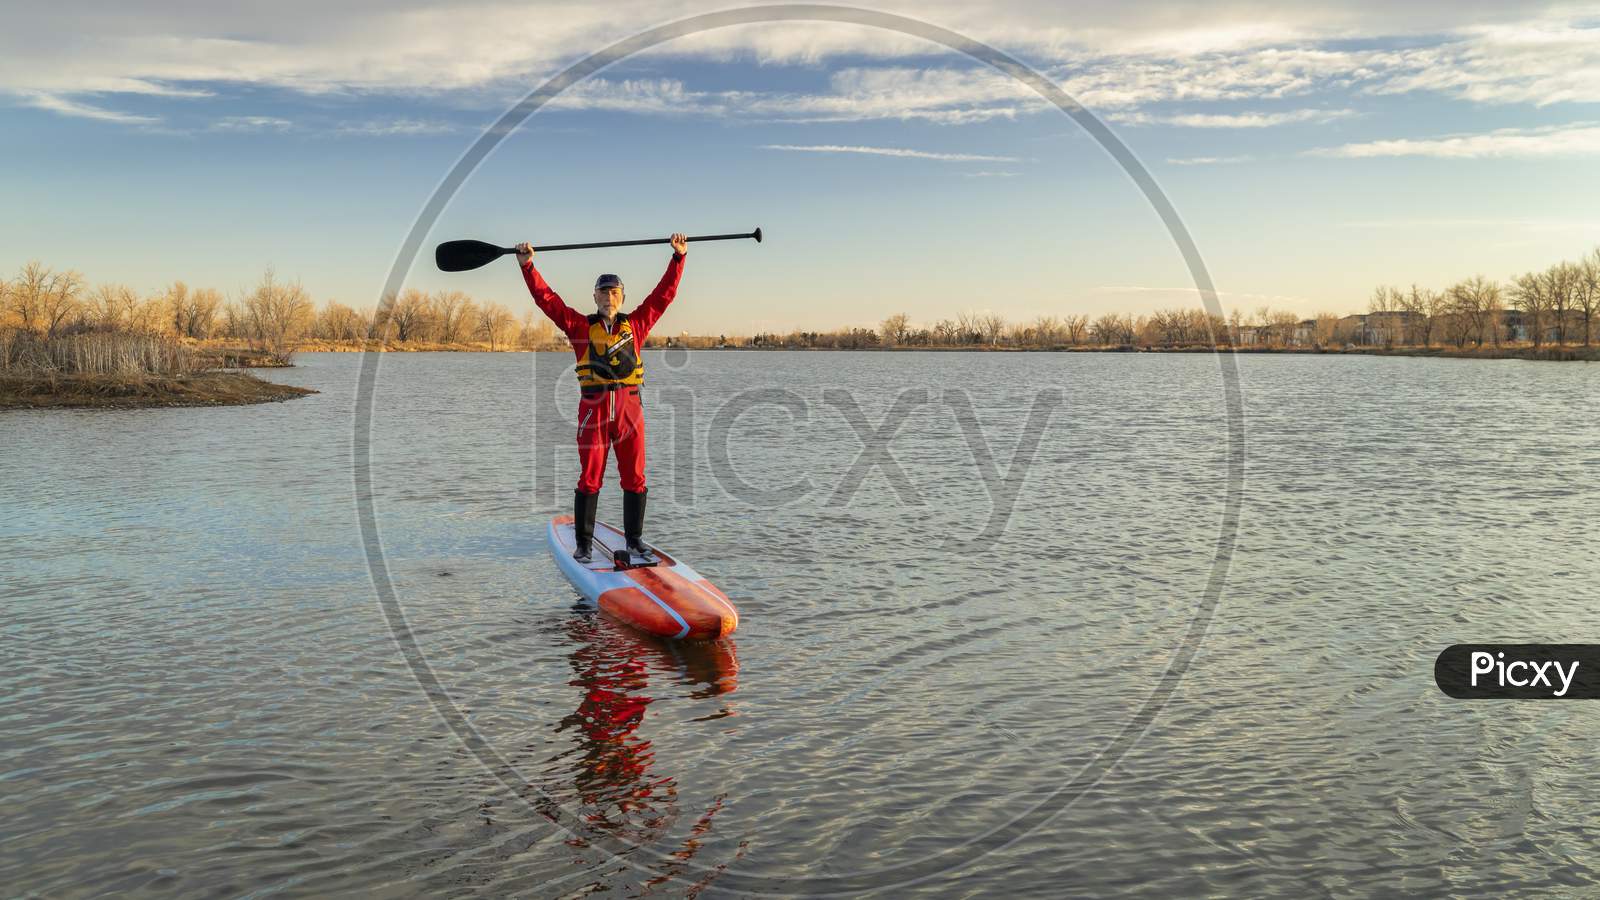 Senior Male Paddler In A Drysuit And Life Jacket Is Paddling A Long Racing Stand Up Paddleboard On A Lake In Colorado, Winter Or Early Spring Scenery, Recreation, Fitness And Training Concept